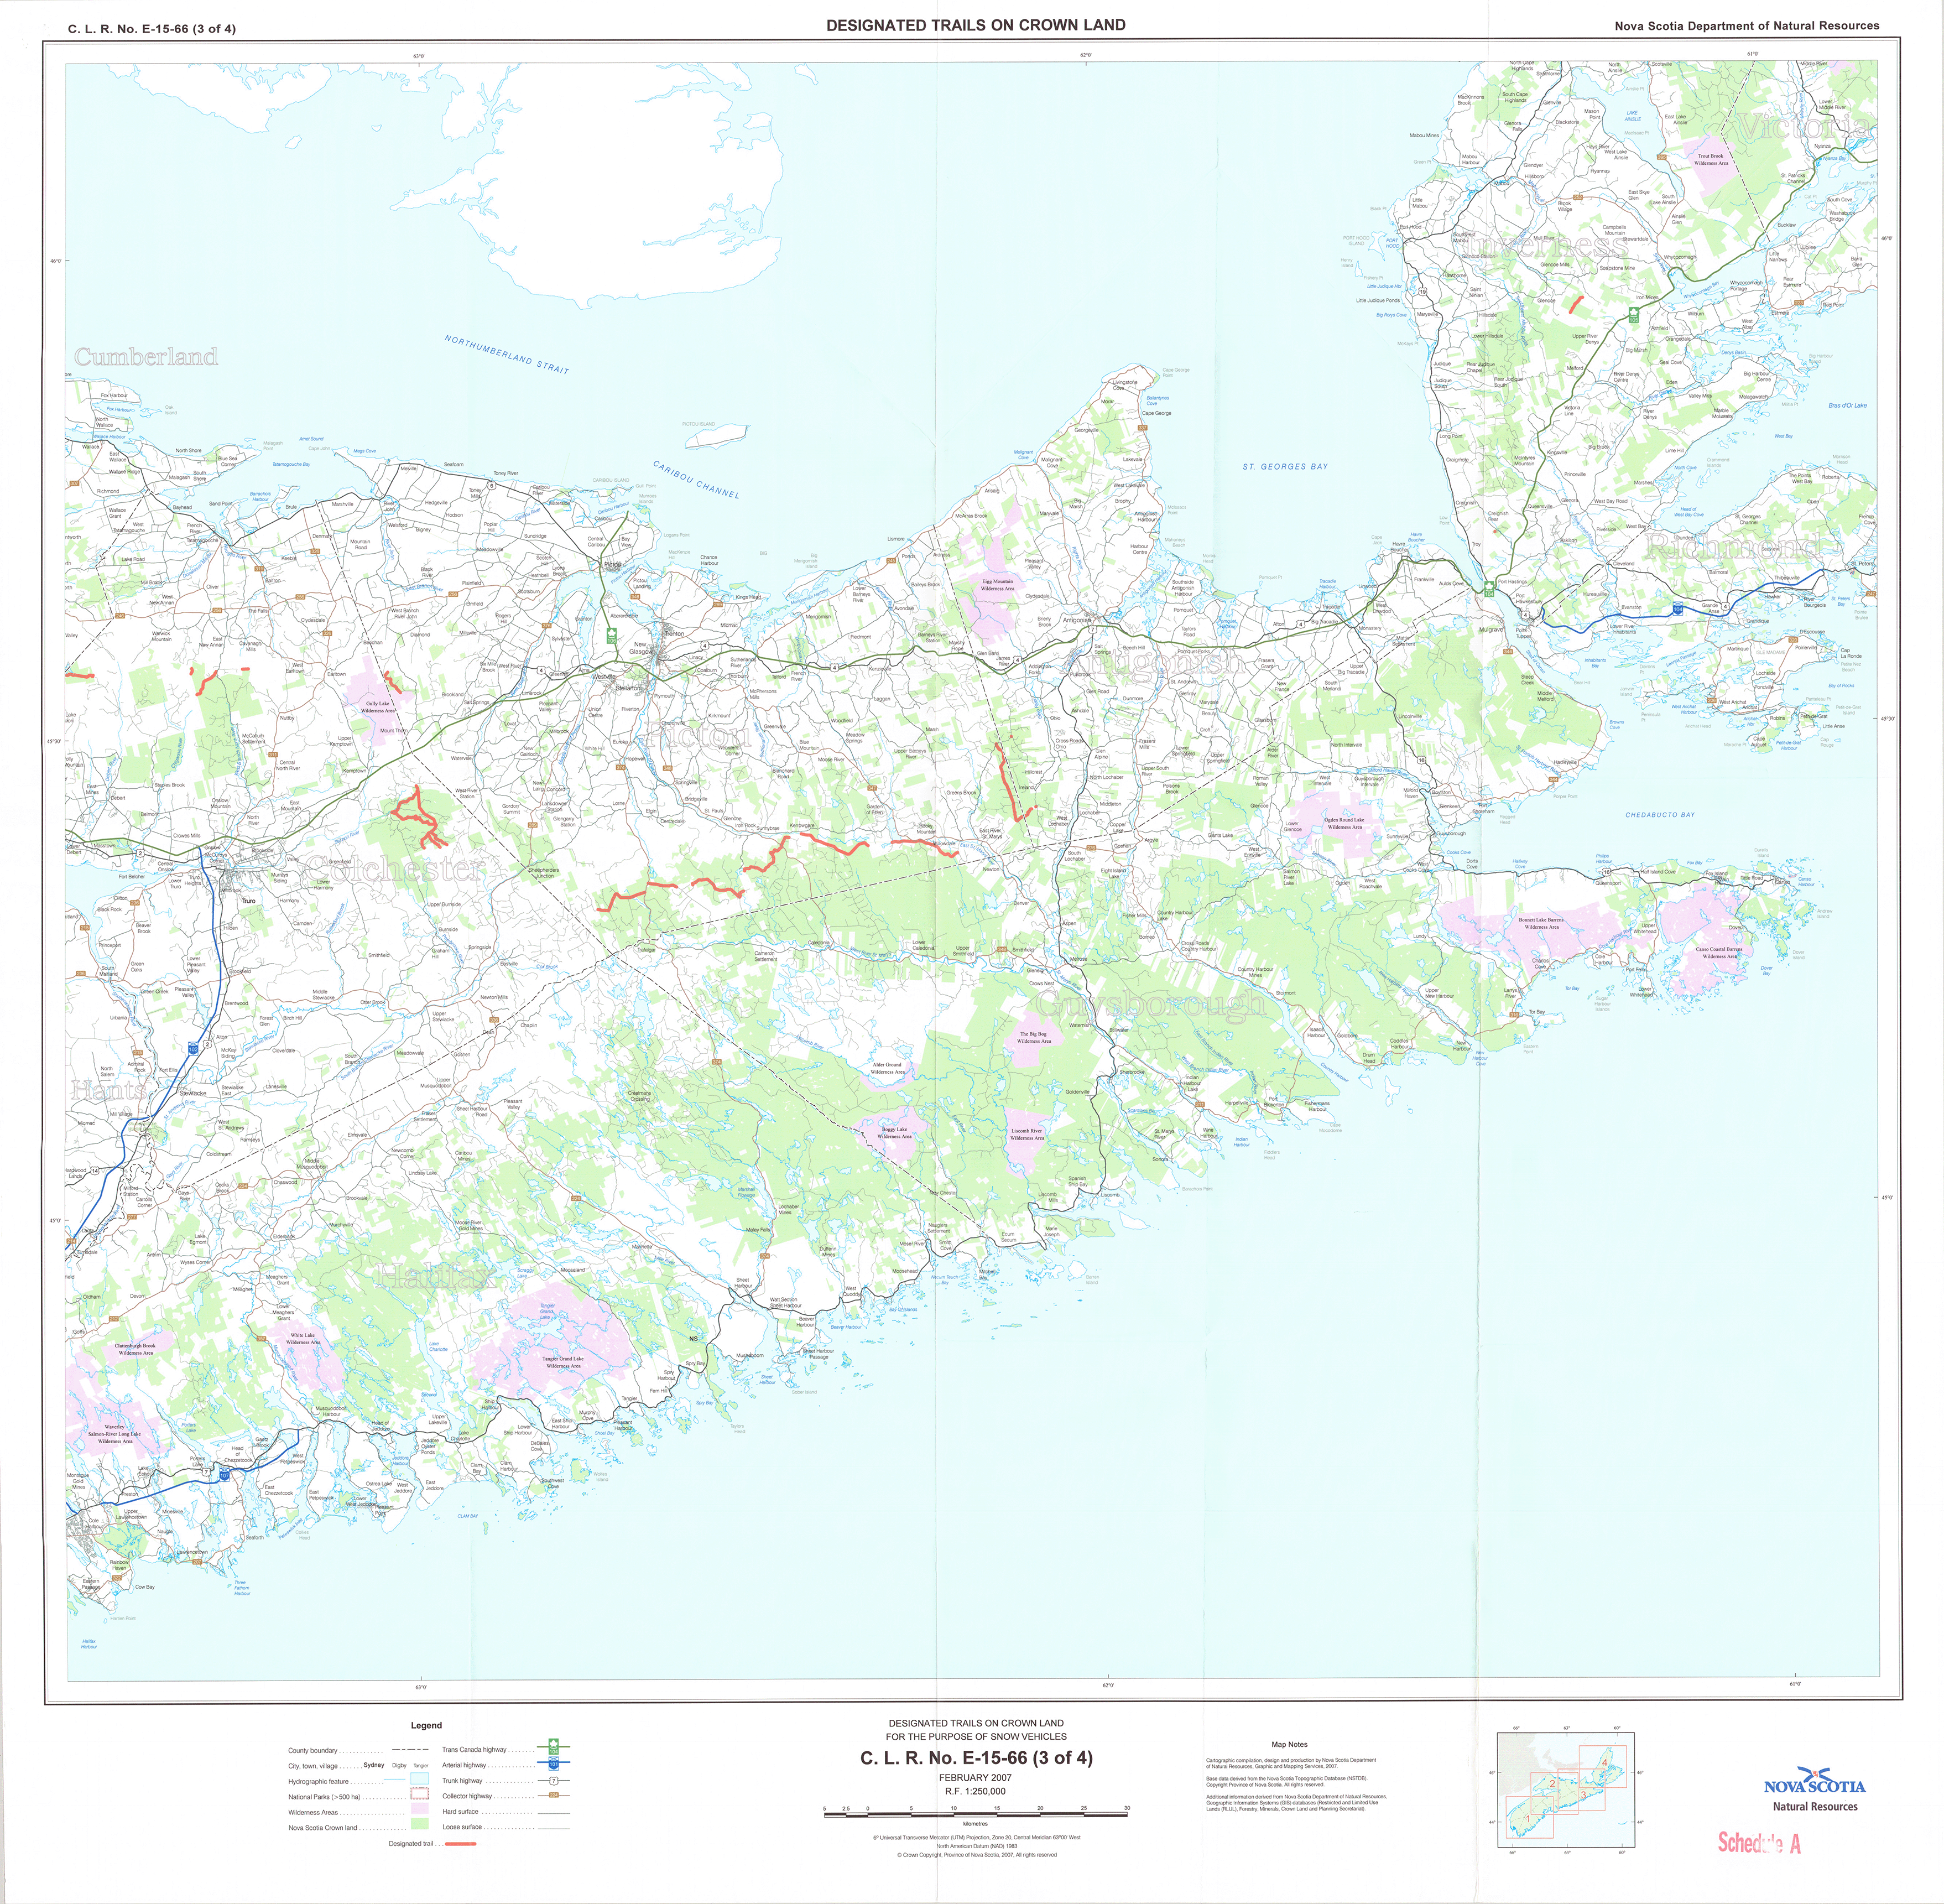 Graphic showing map of designated trails on Crown land for the purpose of snow vehicles